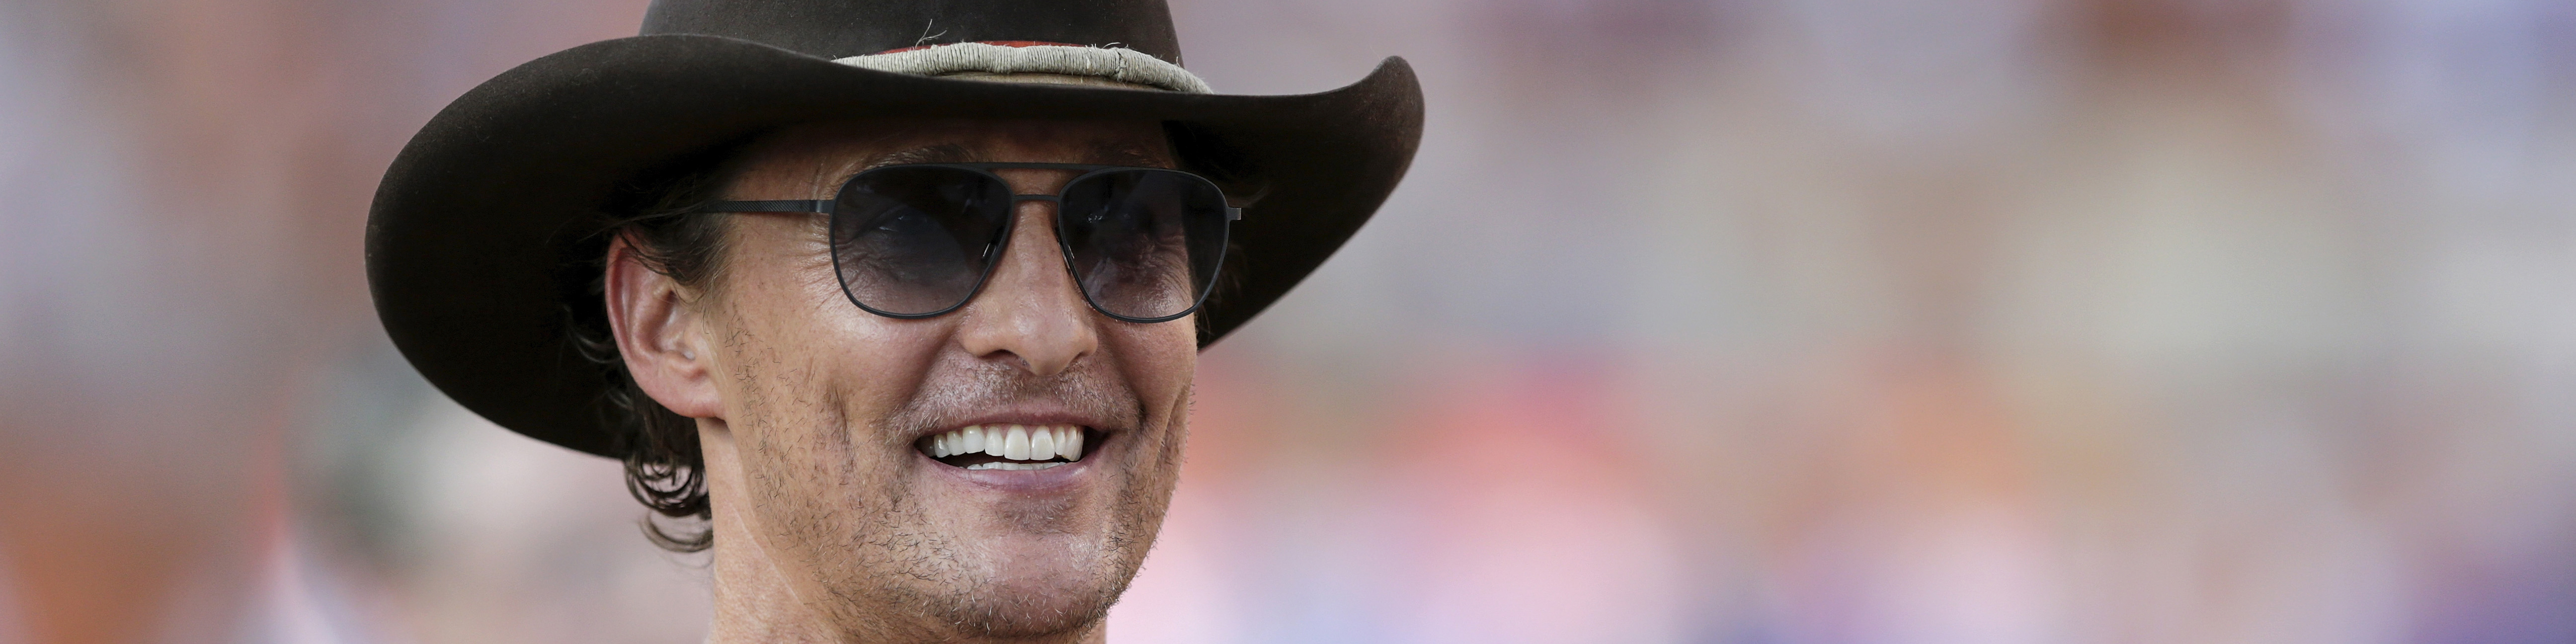 a photo of actor Matthew McConaughey wearing a dark cowboy hat and sunglasses and smiling broadly